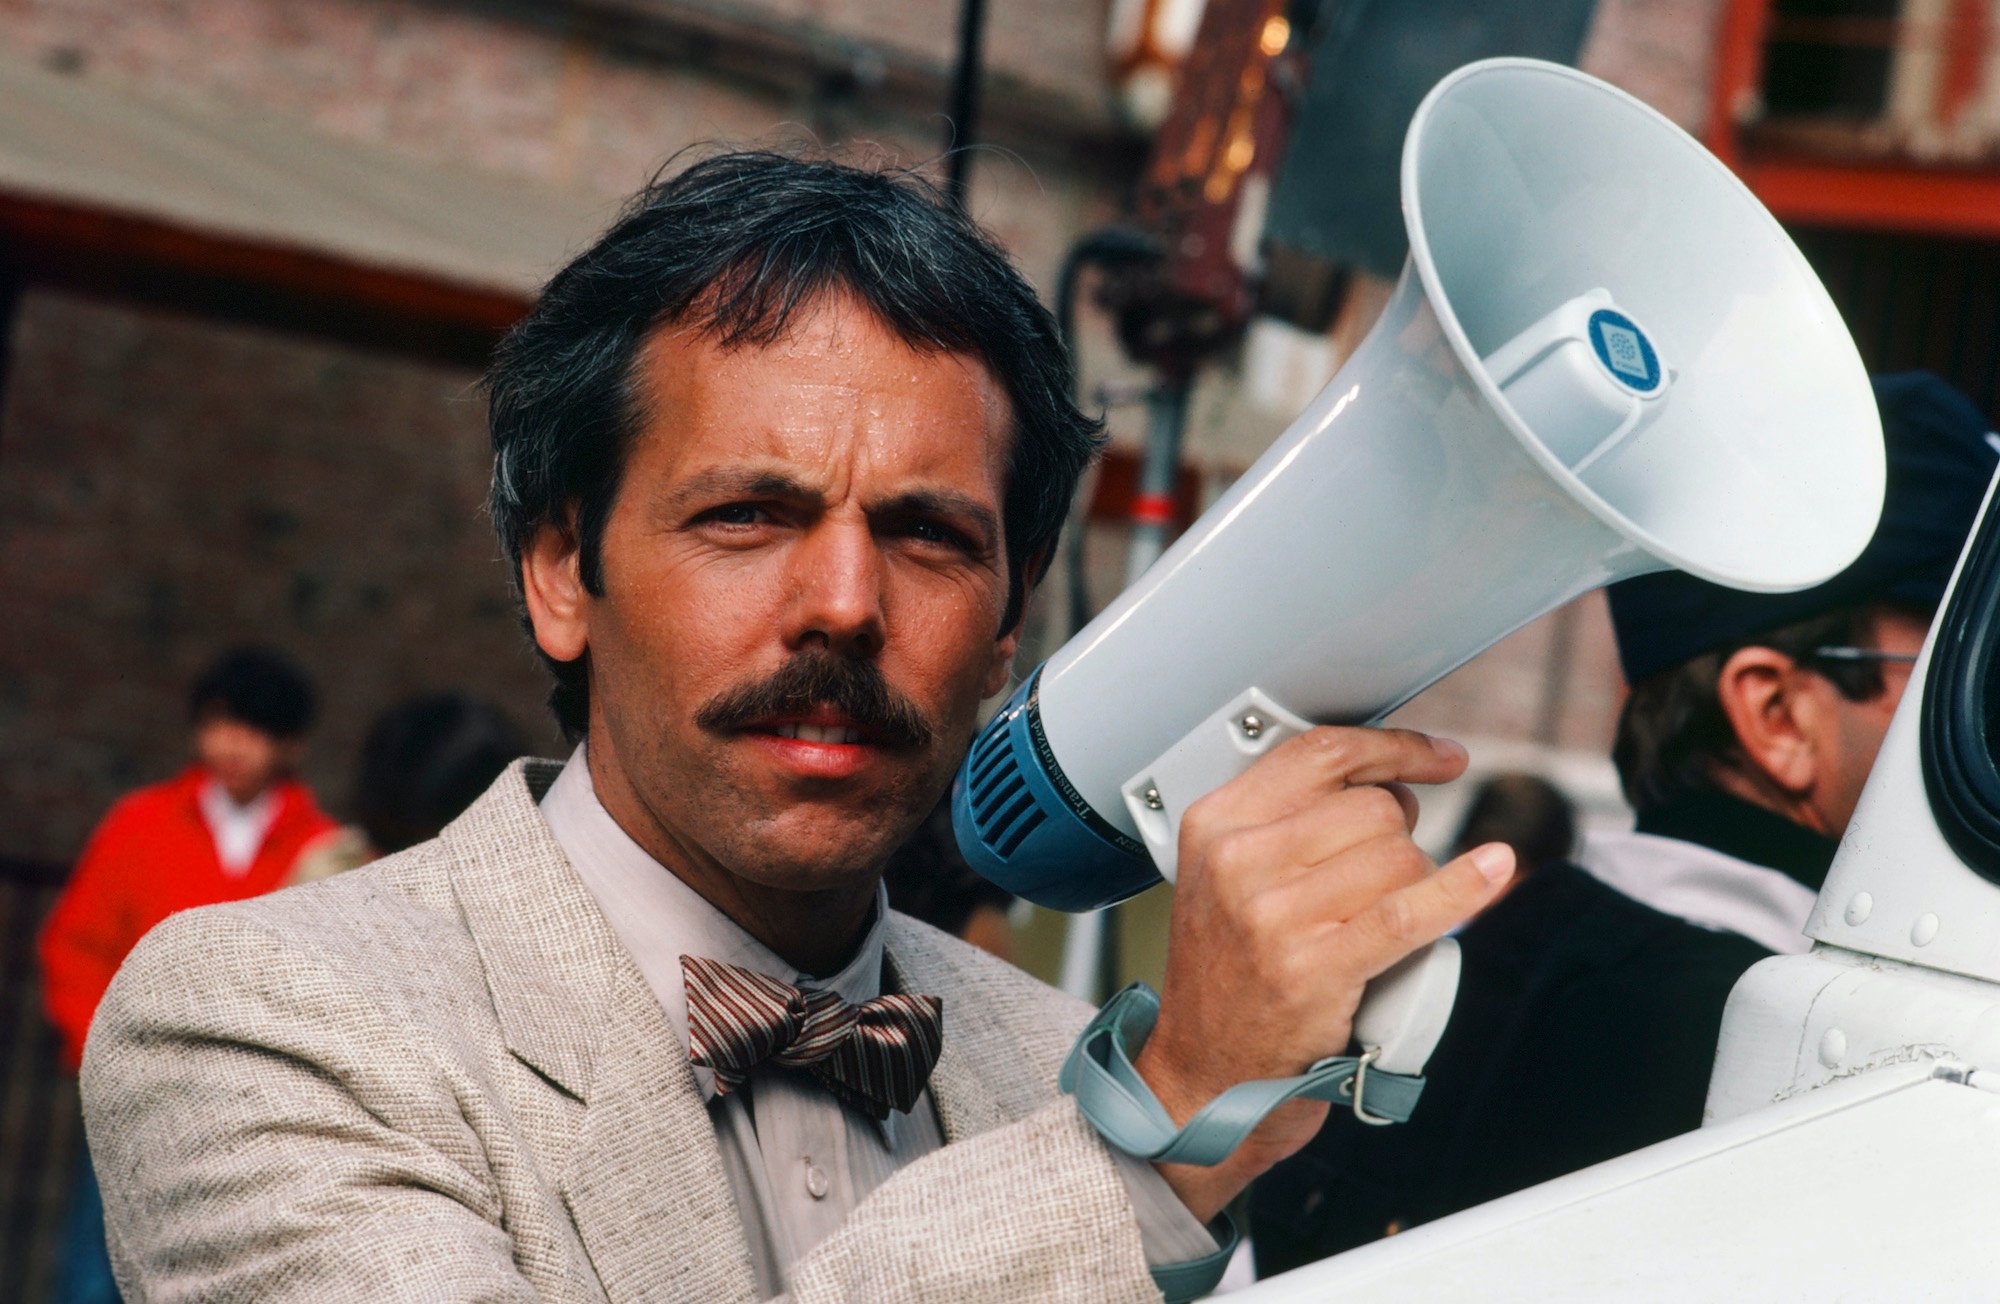 Joe Spano as Sgt./Lt. Henry Goldblum holding a megaphone, squinting, wearing a jacket and bow tie